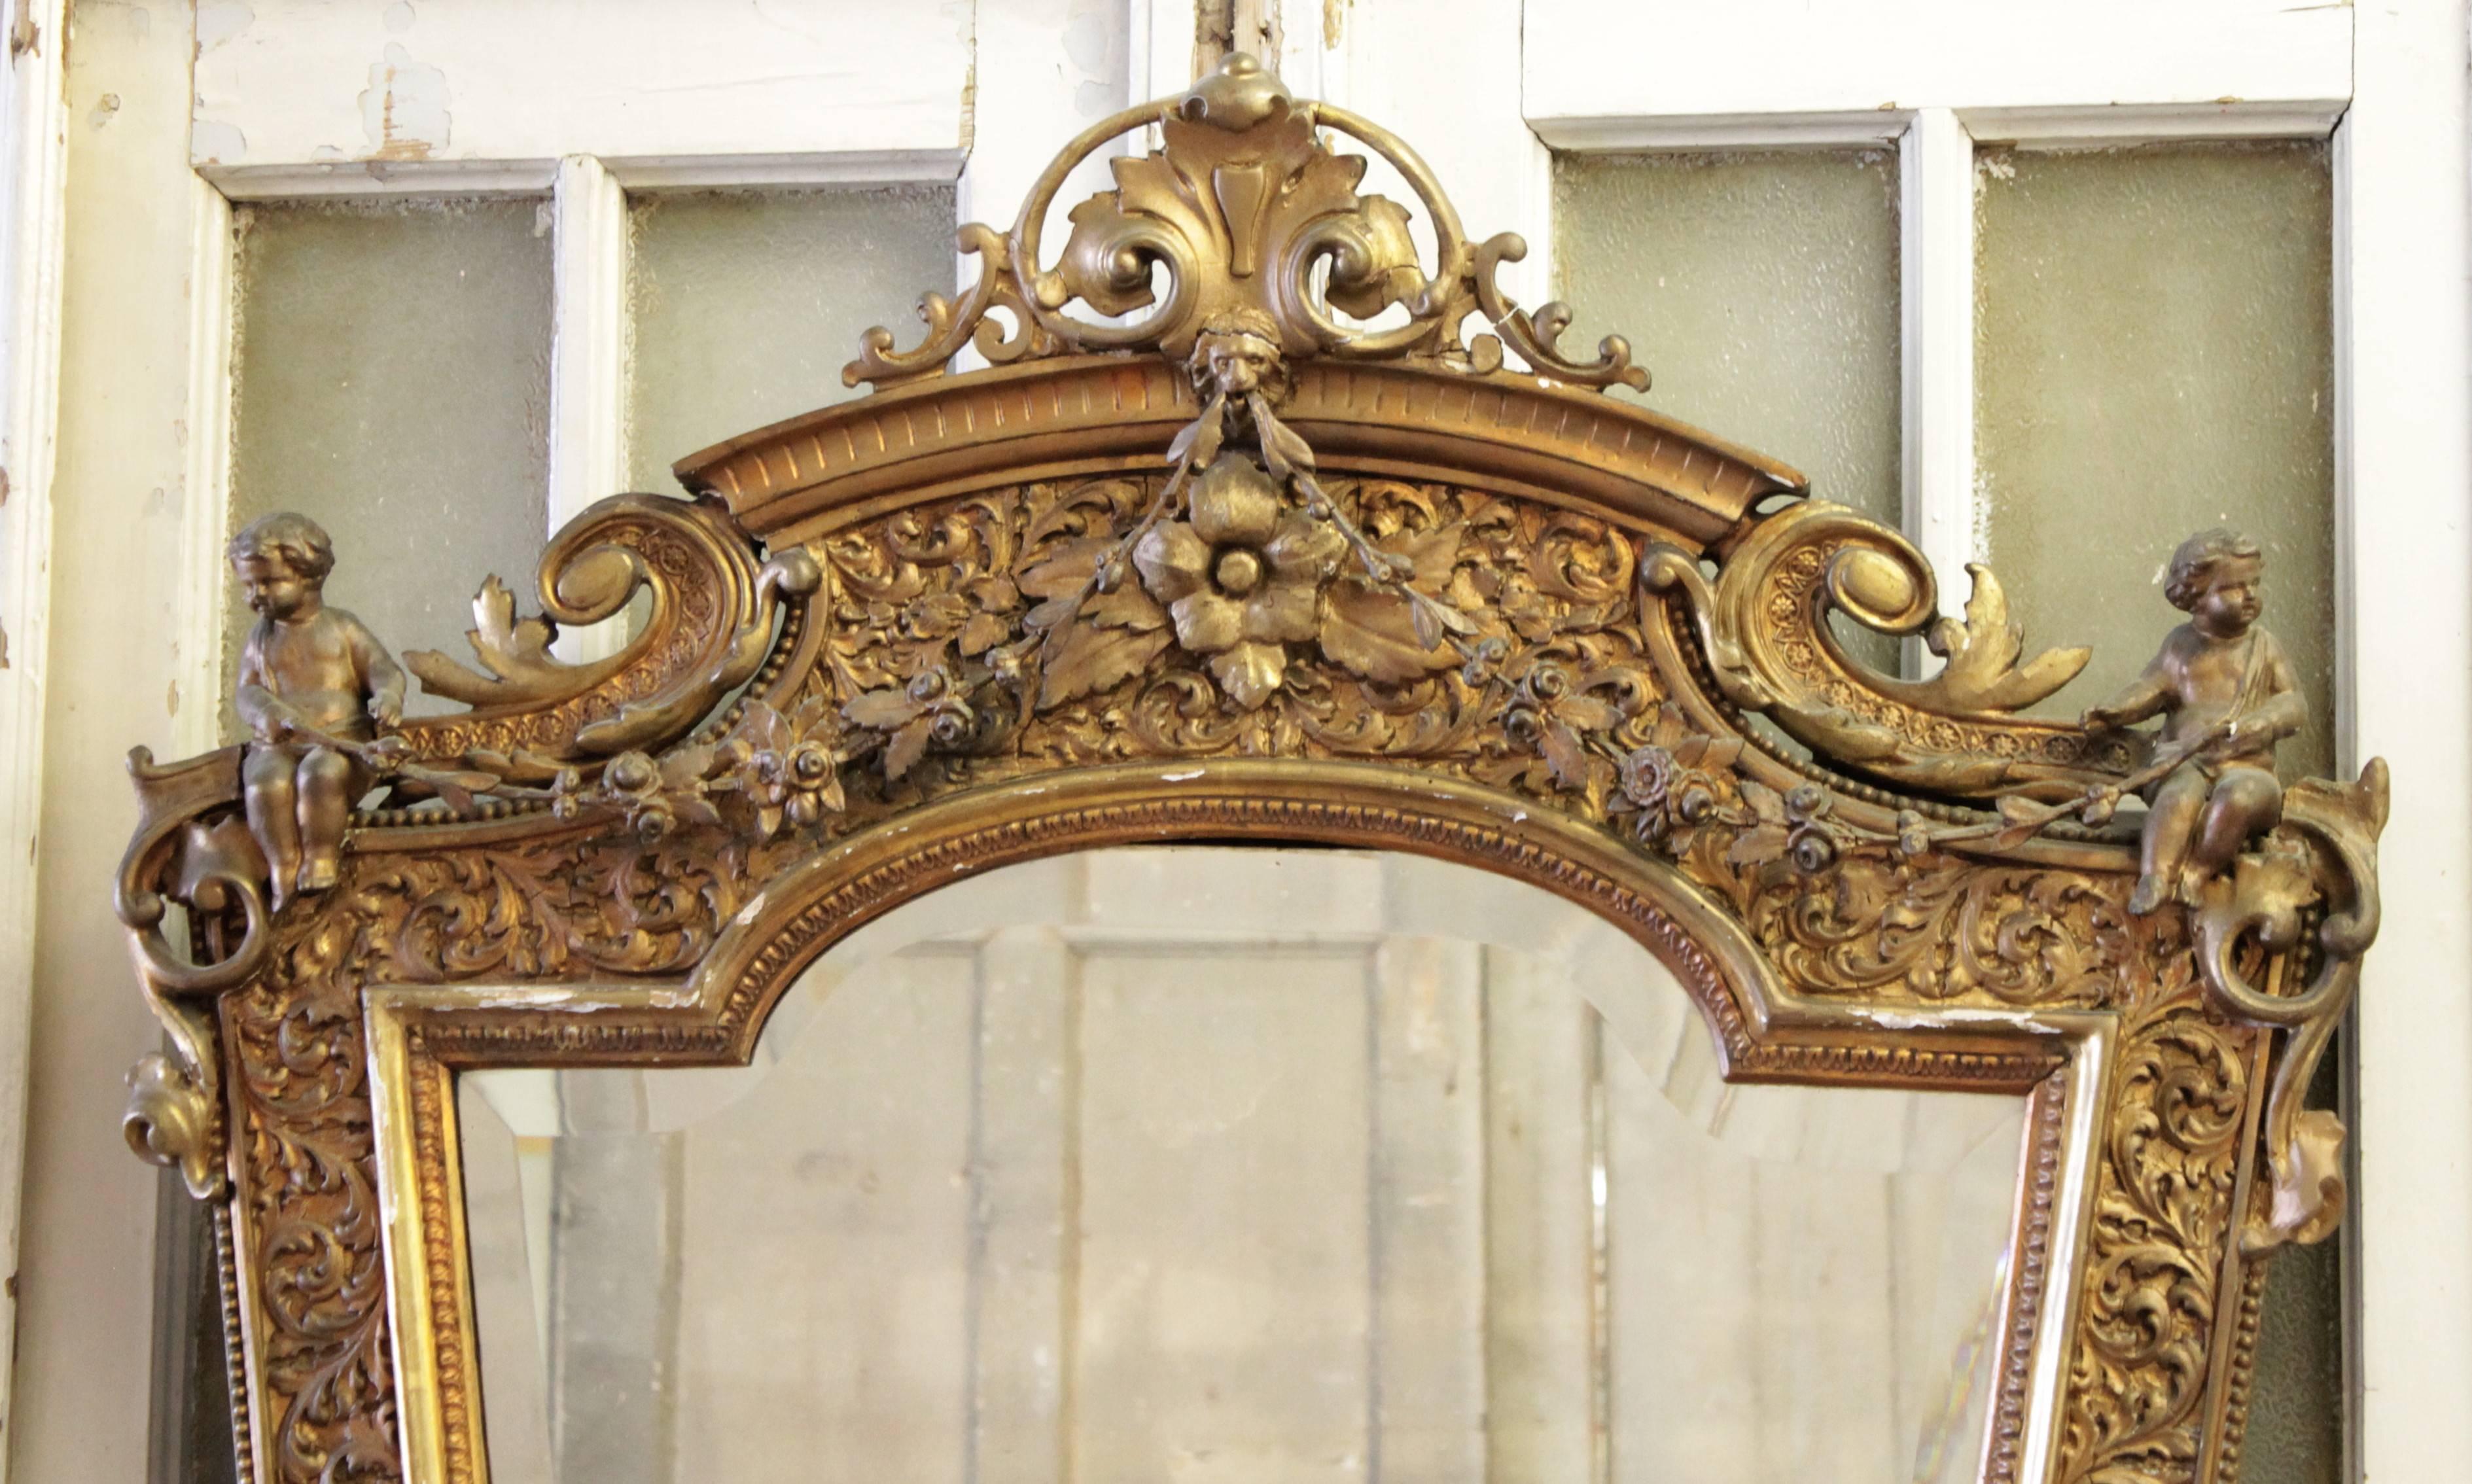 Pair of large French Louis XV figural hand-carved wood and gesso mirrors. The elaborate carved mirrors feature extended floral swags from the crest to each surmounted cherub. Original beveled mirrors have some aging.